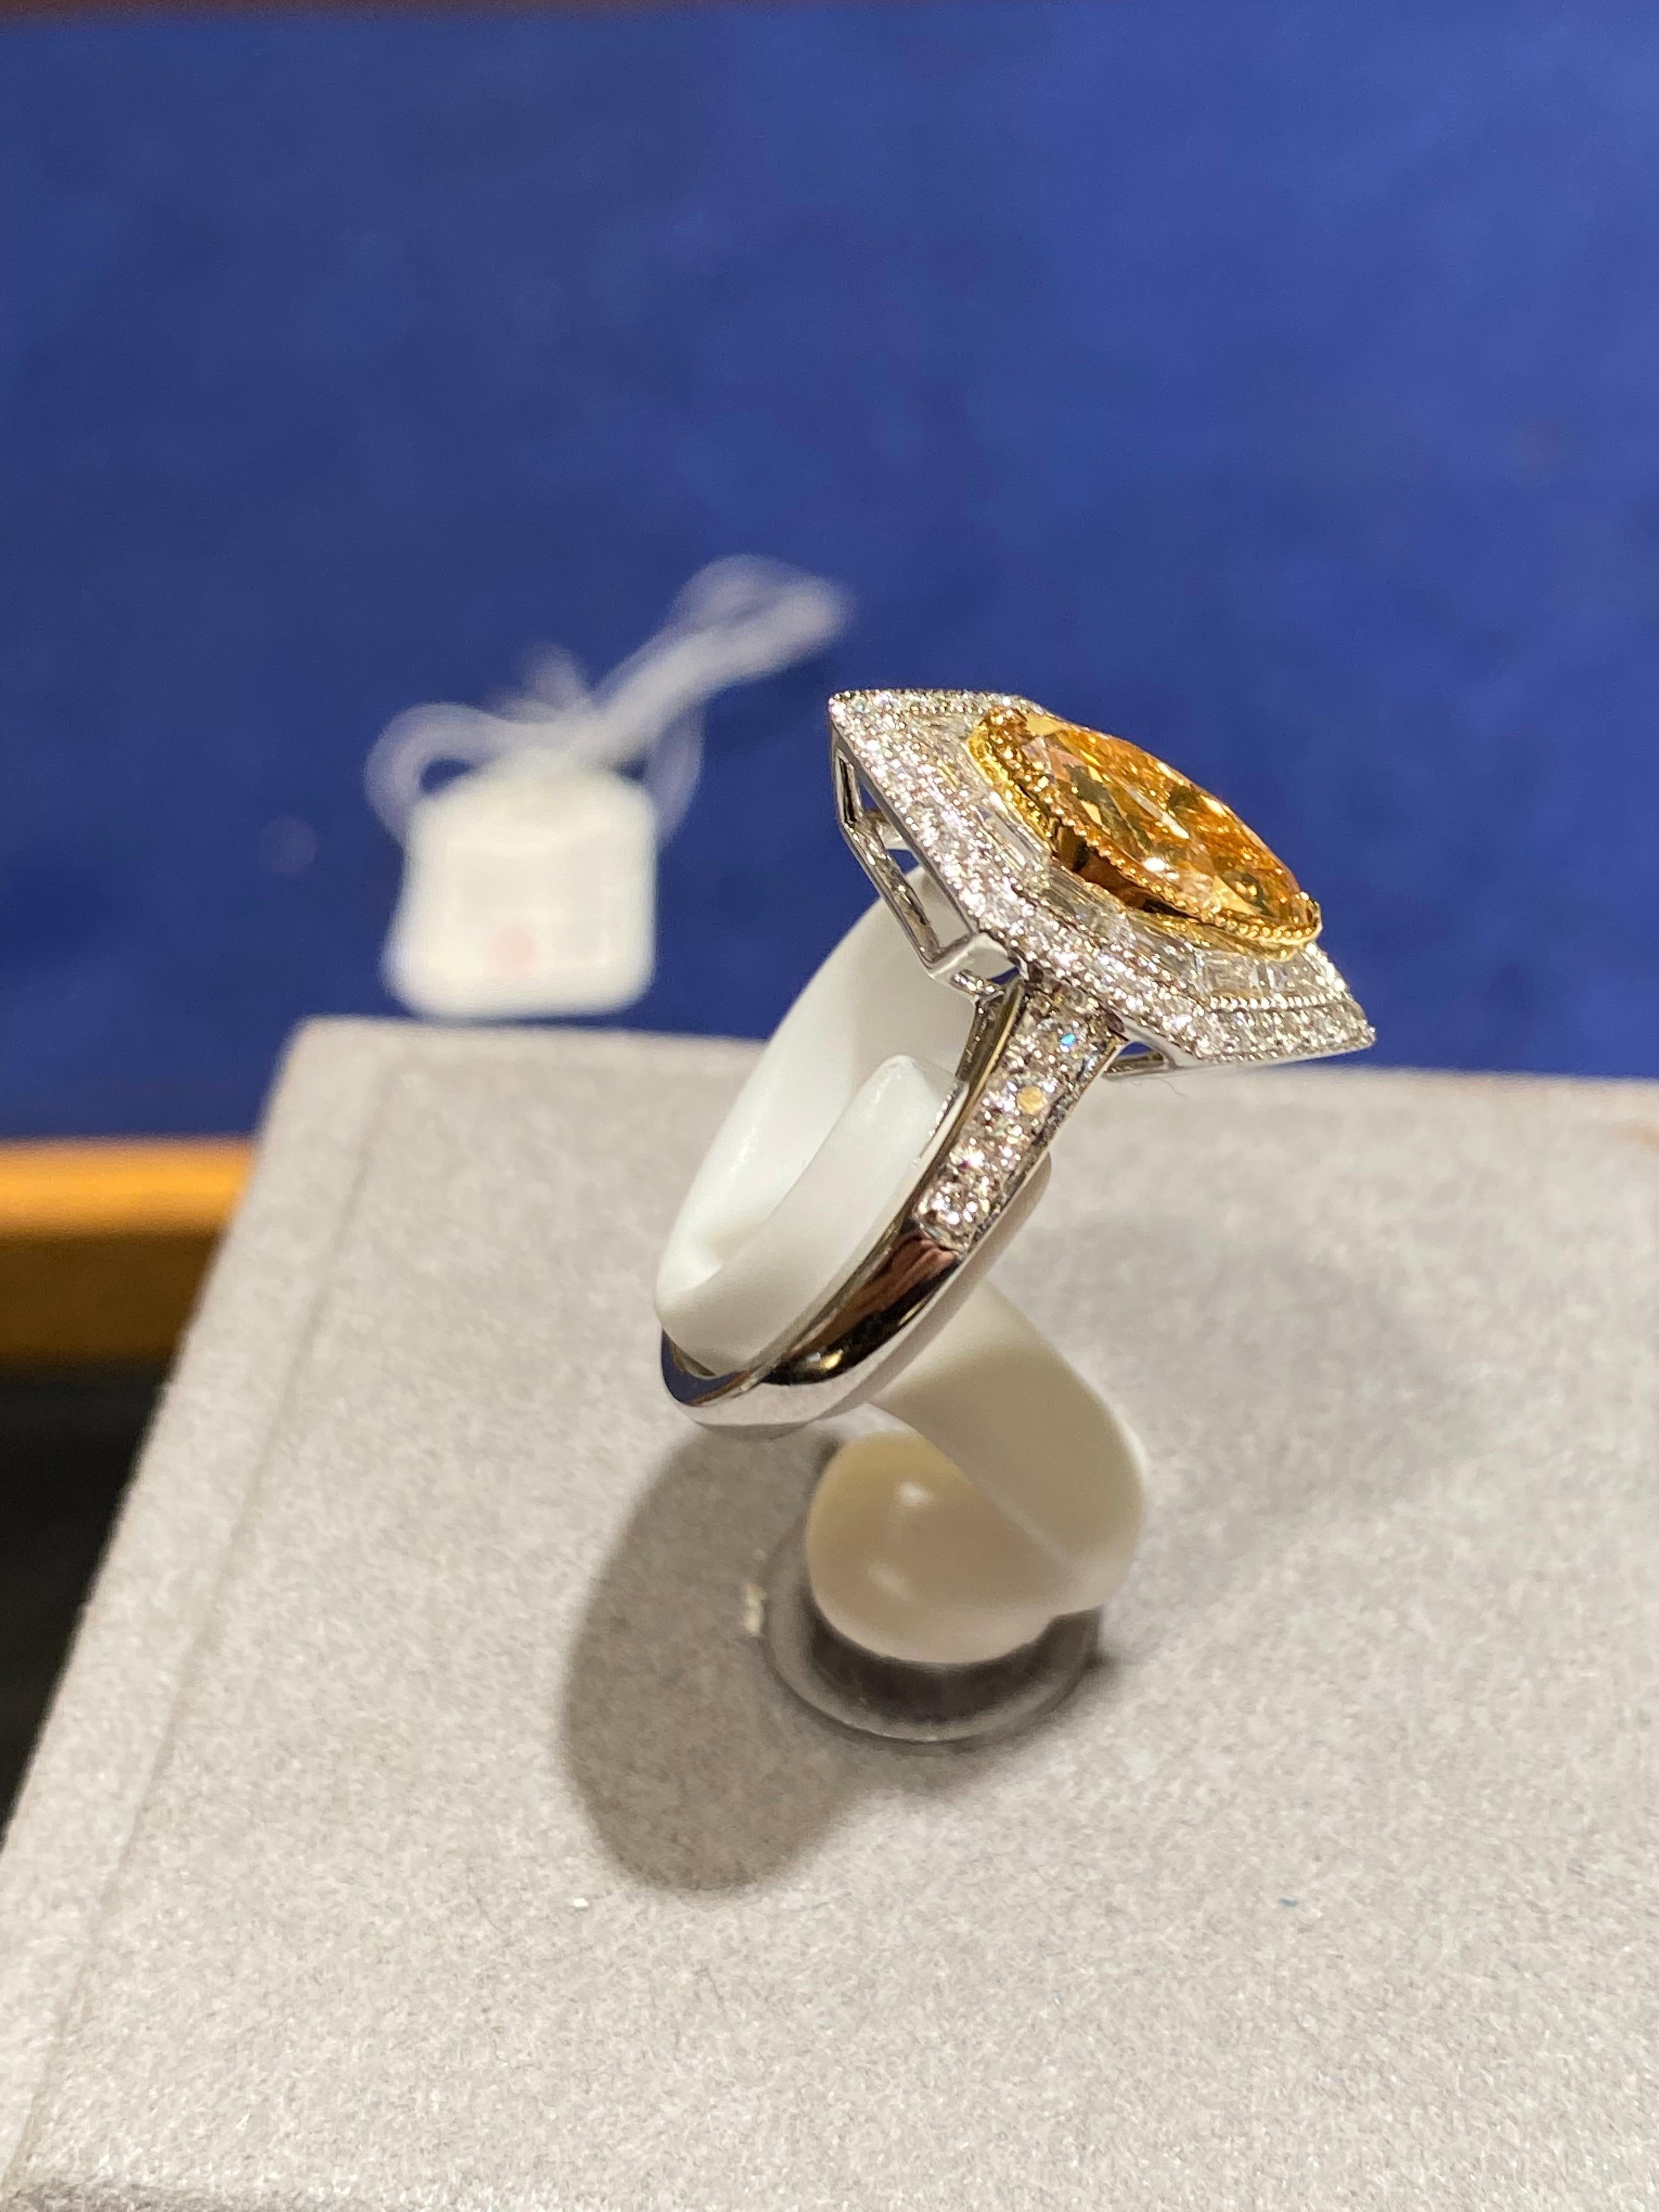 18k gold
Main center diamond is 1.3 CT intensive brownish yellow Si clarity
Natural diamonds 0.862 ct in vs clarity and E/F colour
Ring is set in 18k white and yellow gold 
total weight is 5.54 gram